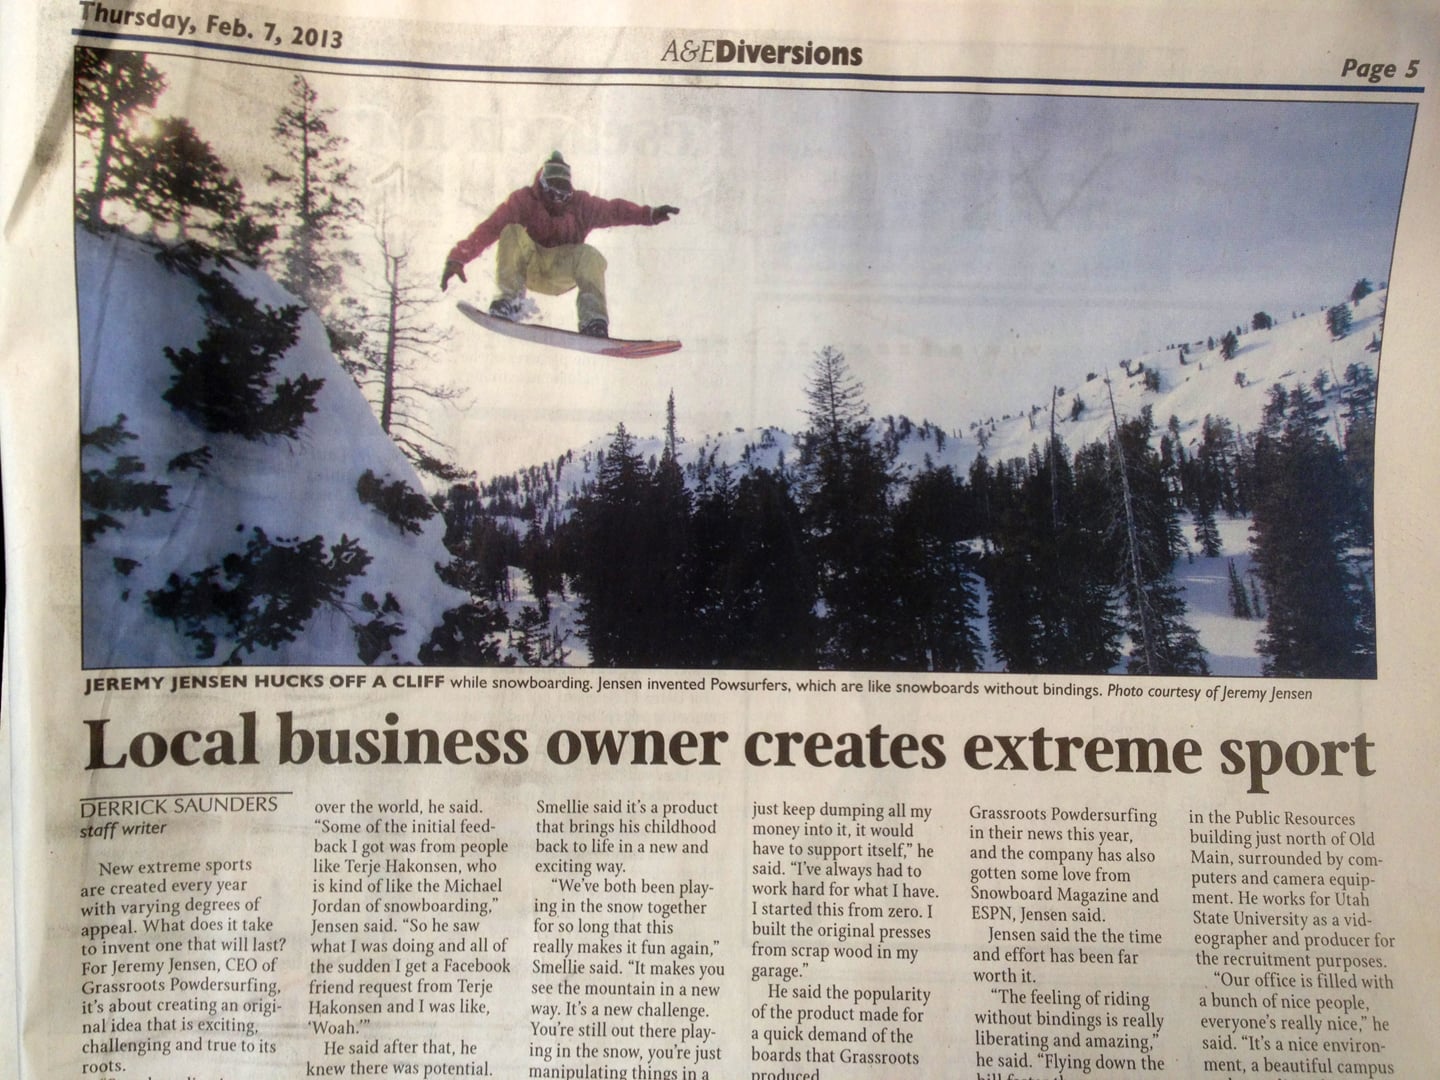 Herald Journal Article on Grassroots Powsurfing Cover Page